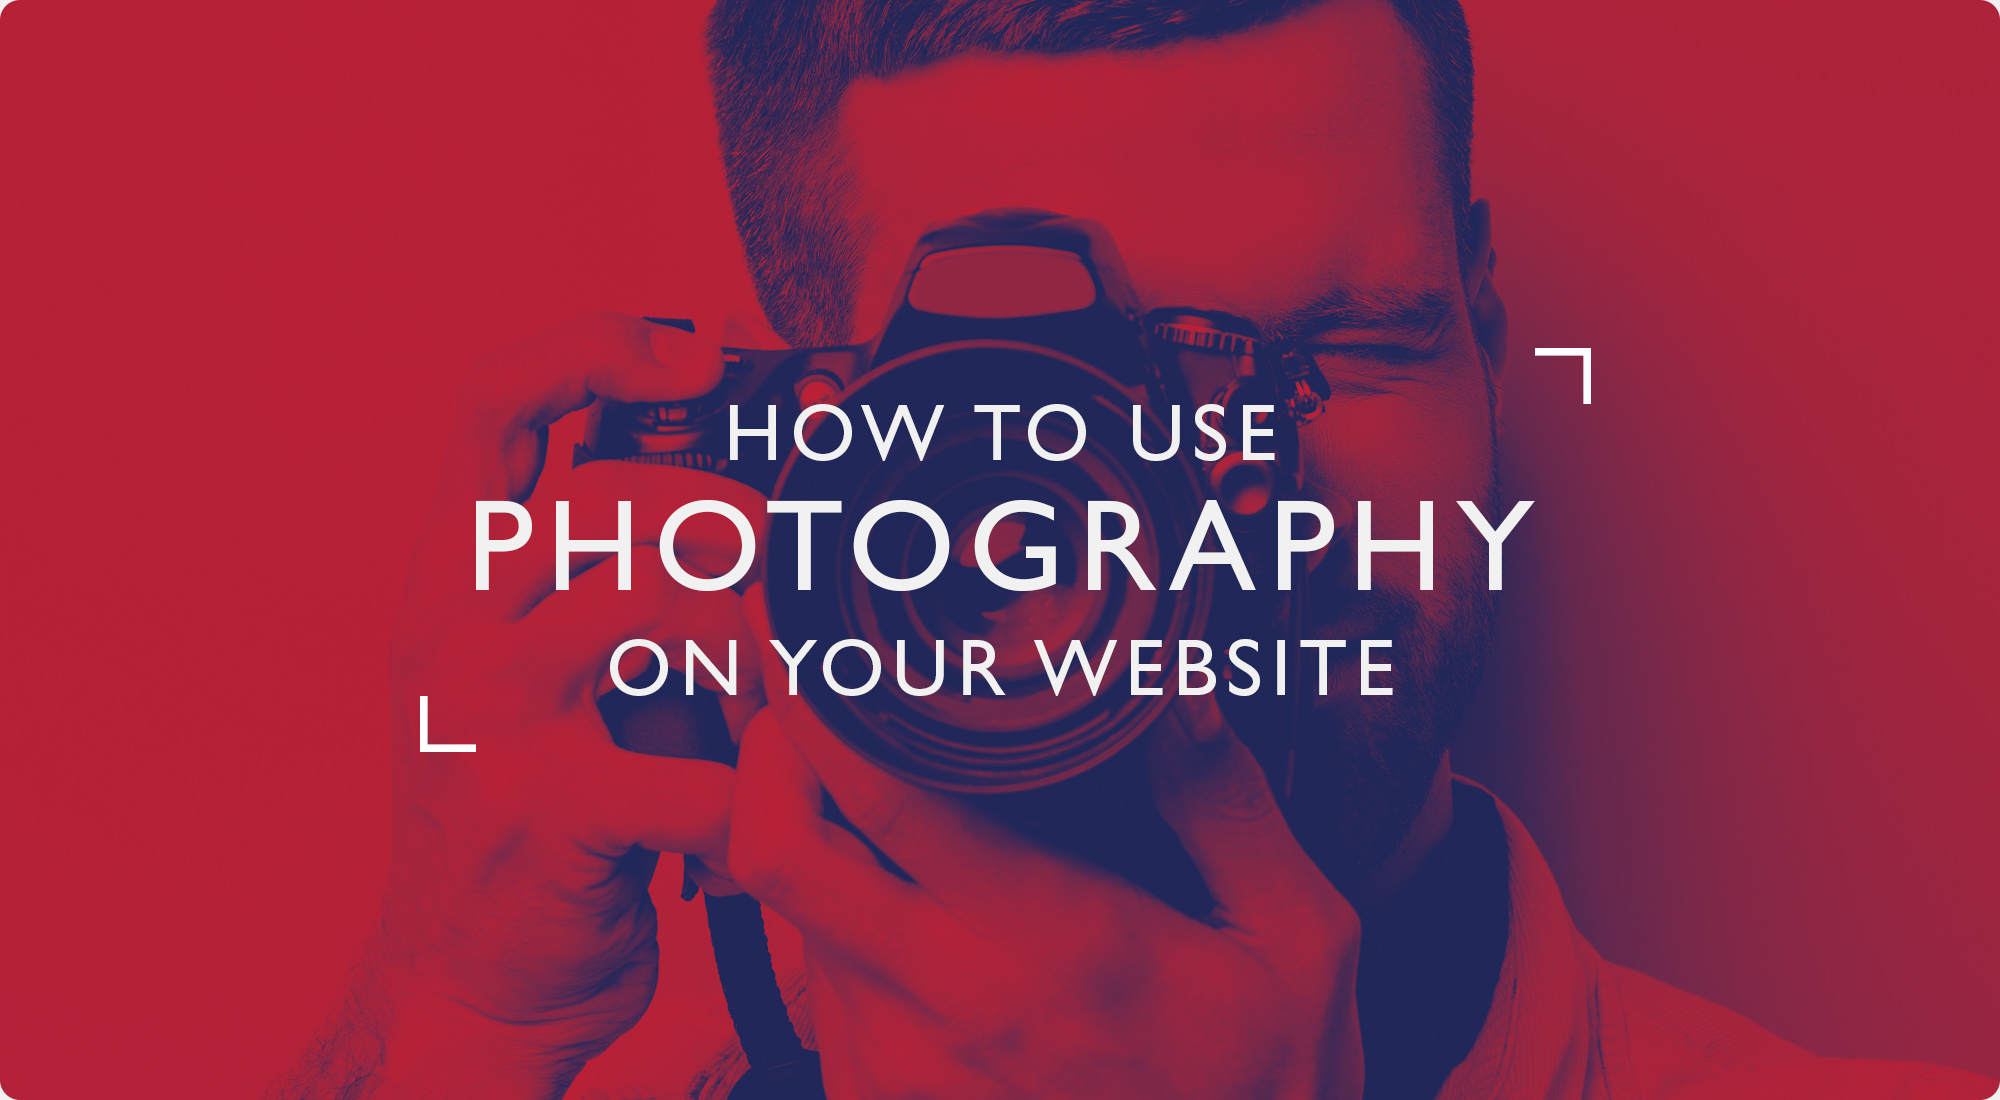 How to use photography on your website